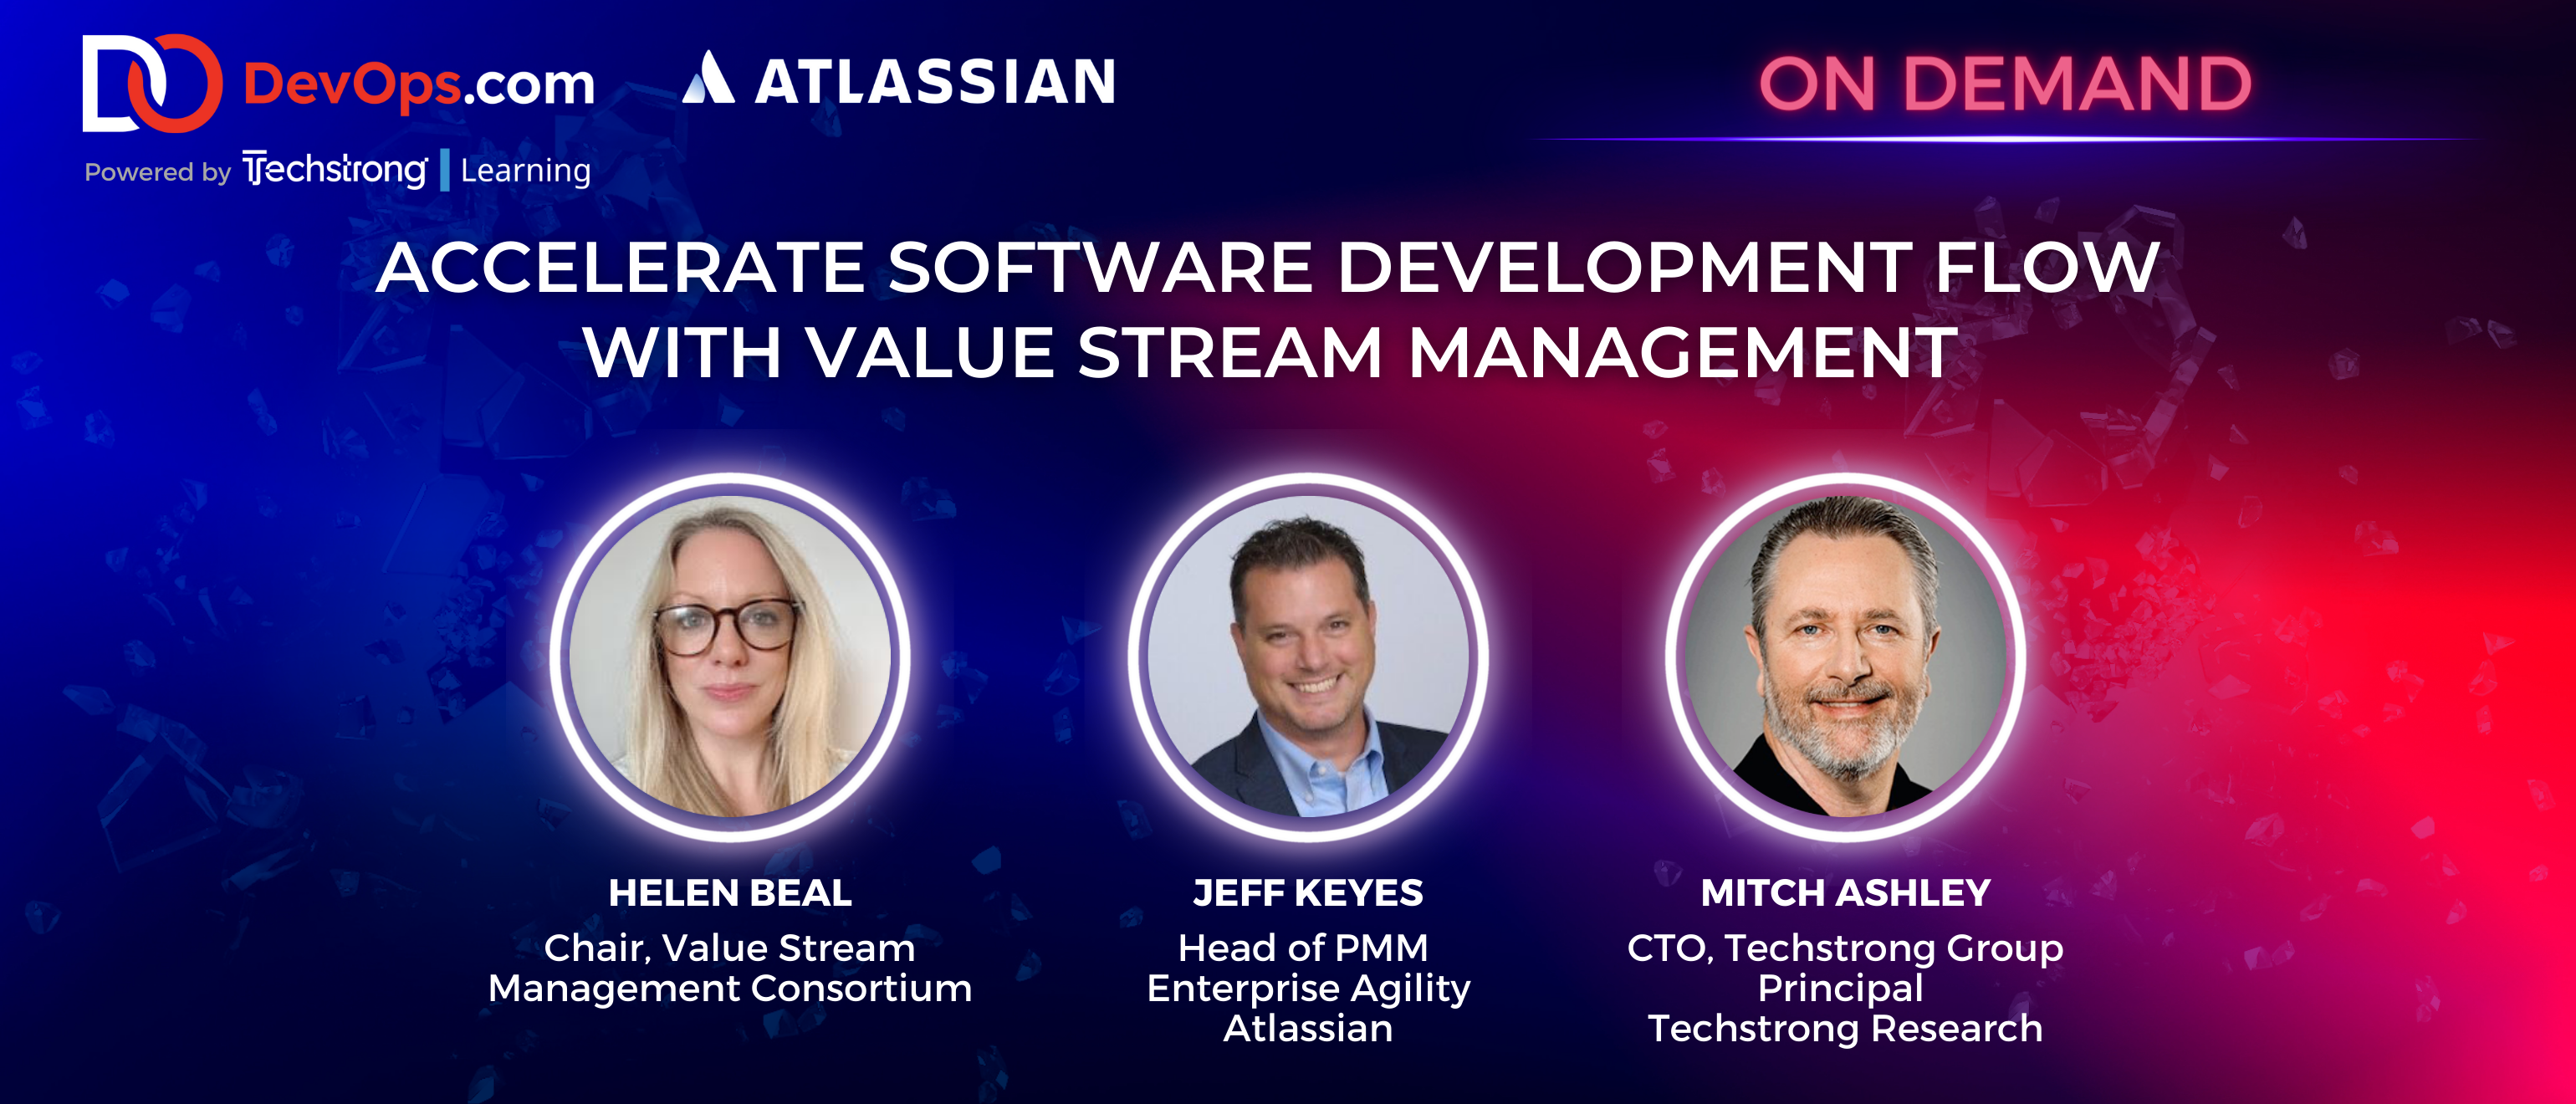 Accelerate Software Development Flow with Value Stream Management